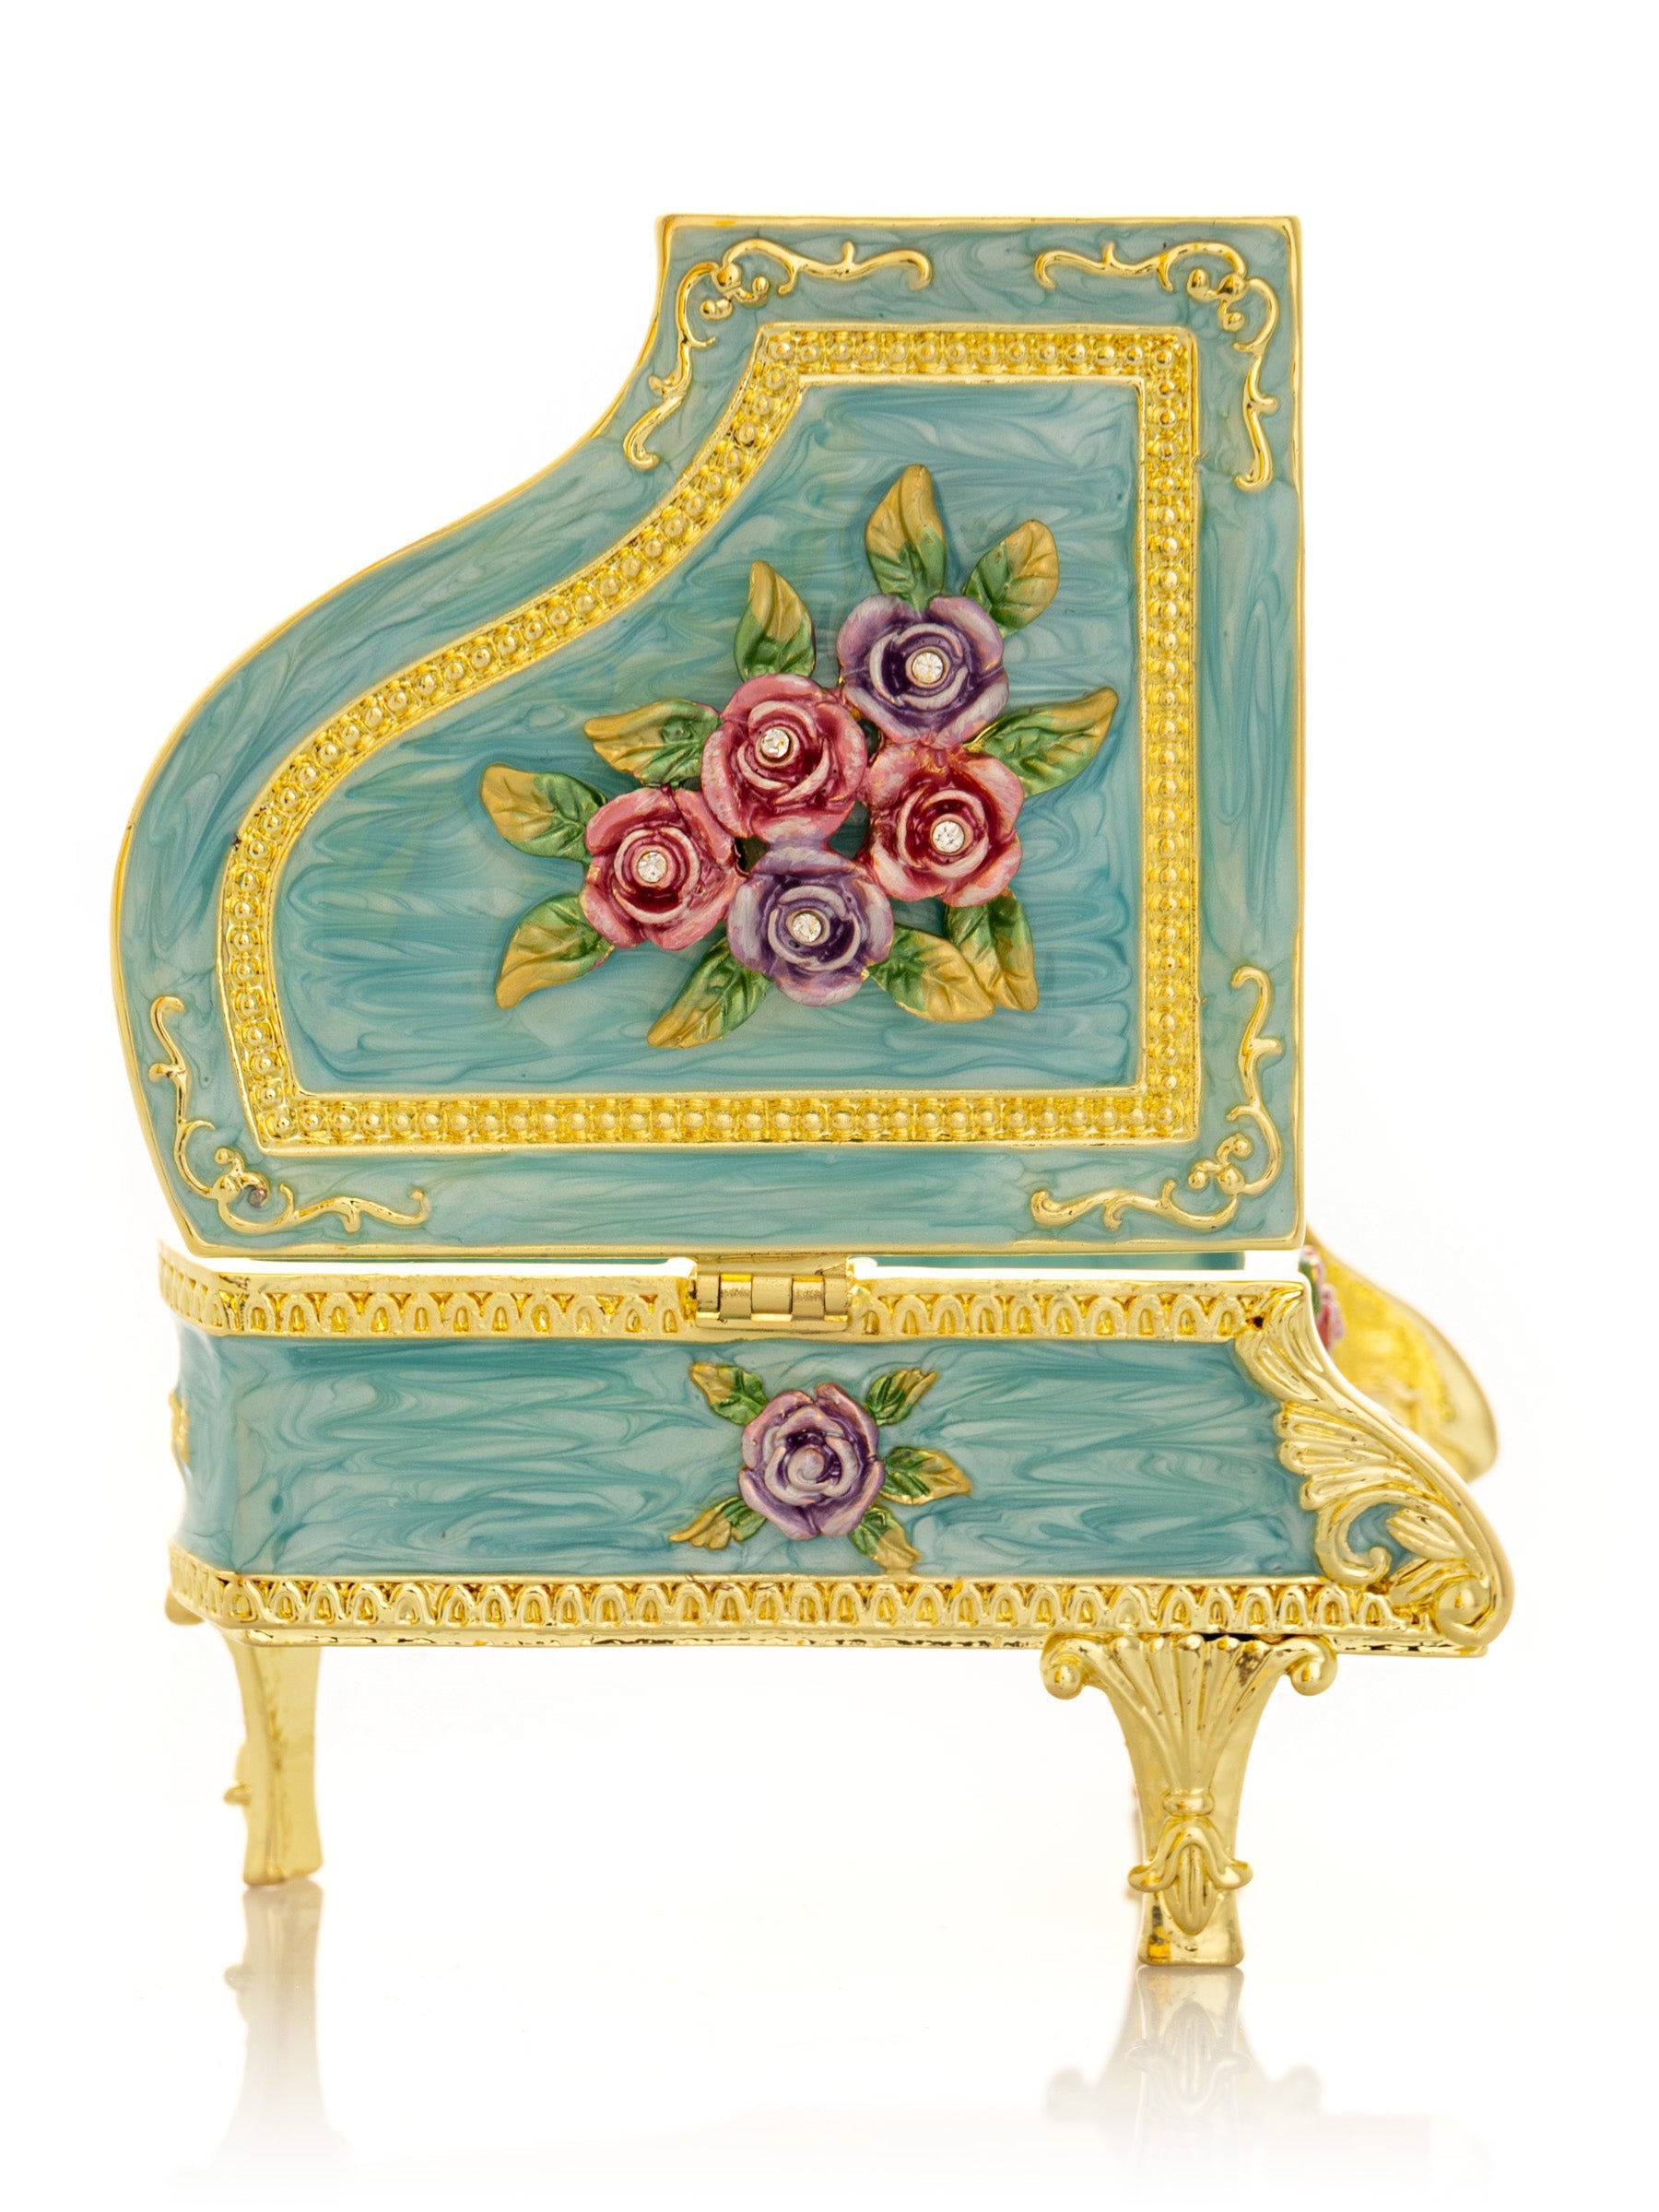 Turquoise Piano with Flowers-4